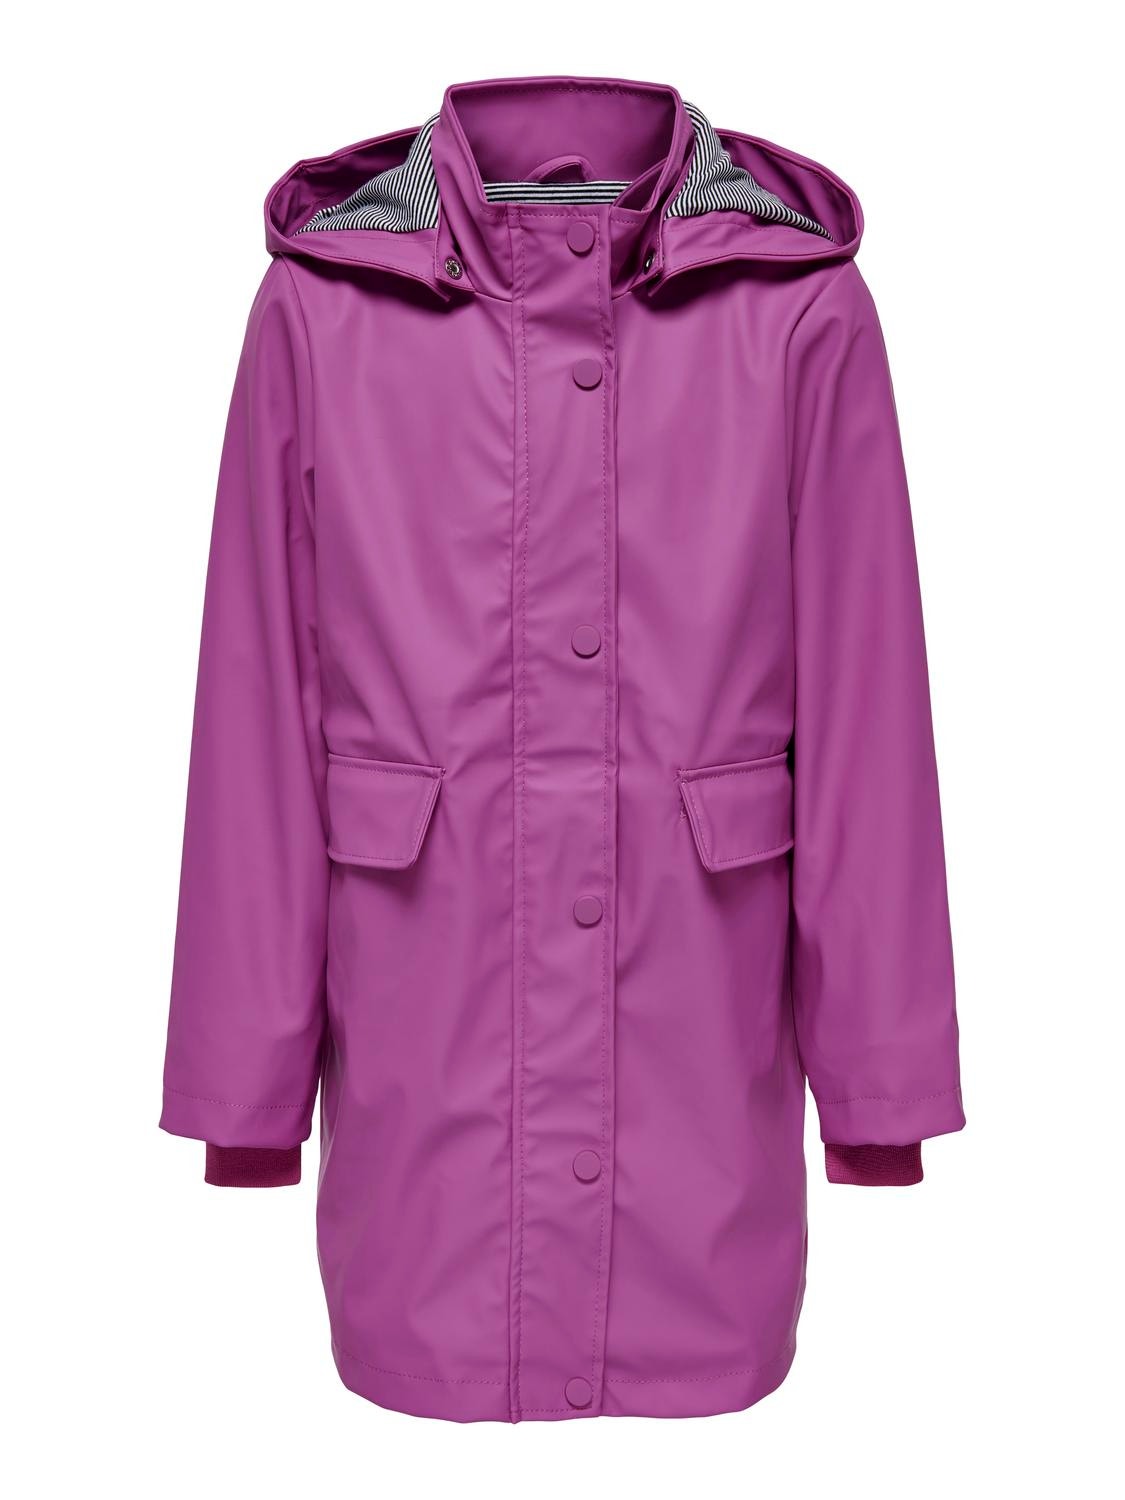 ONLY Long Solid Colored Rain jacket -Purple Wine - 15246354